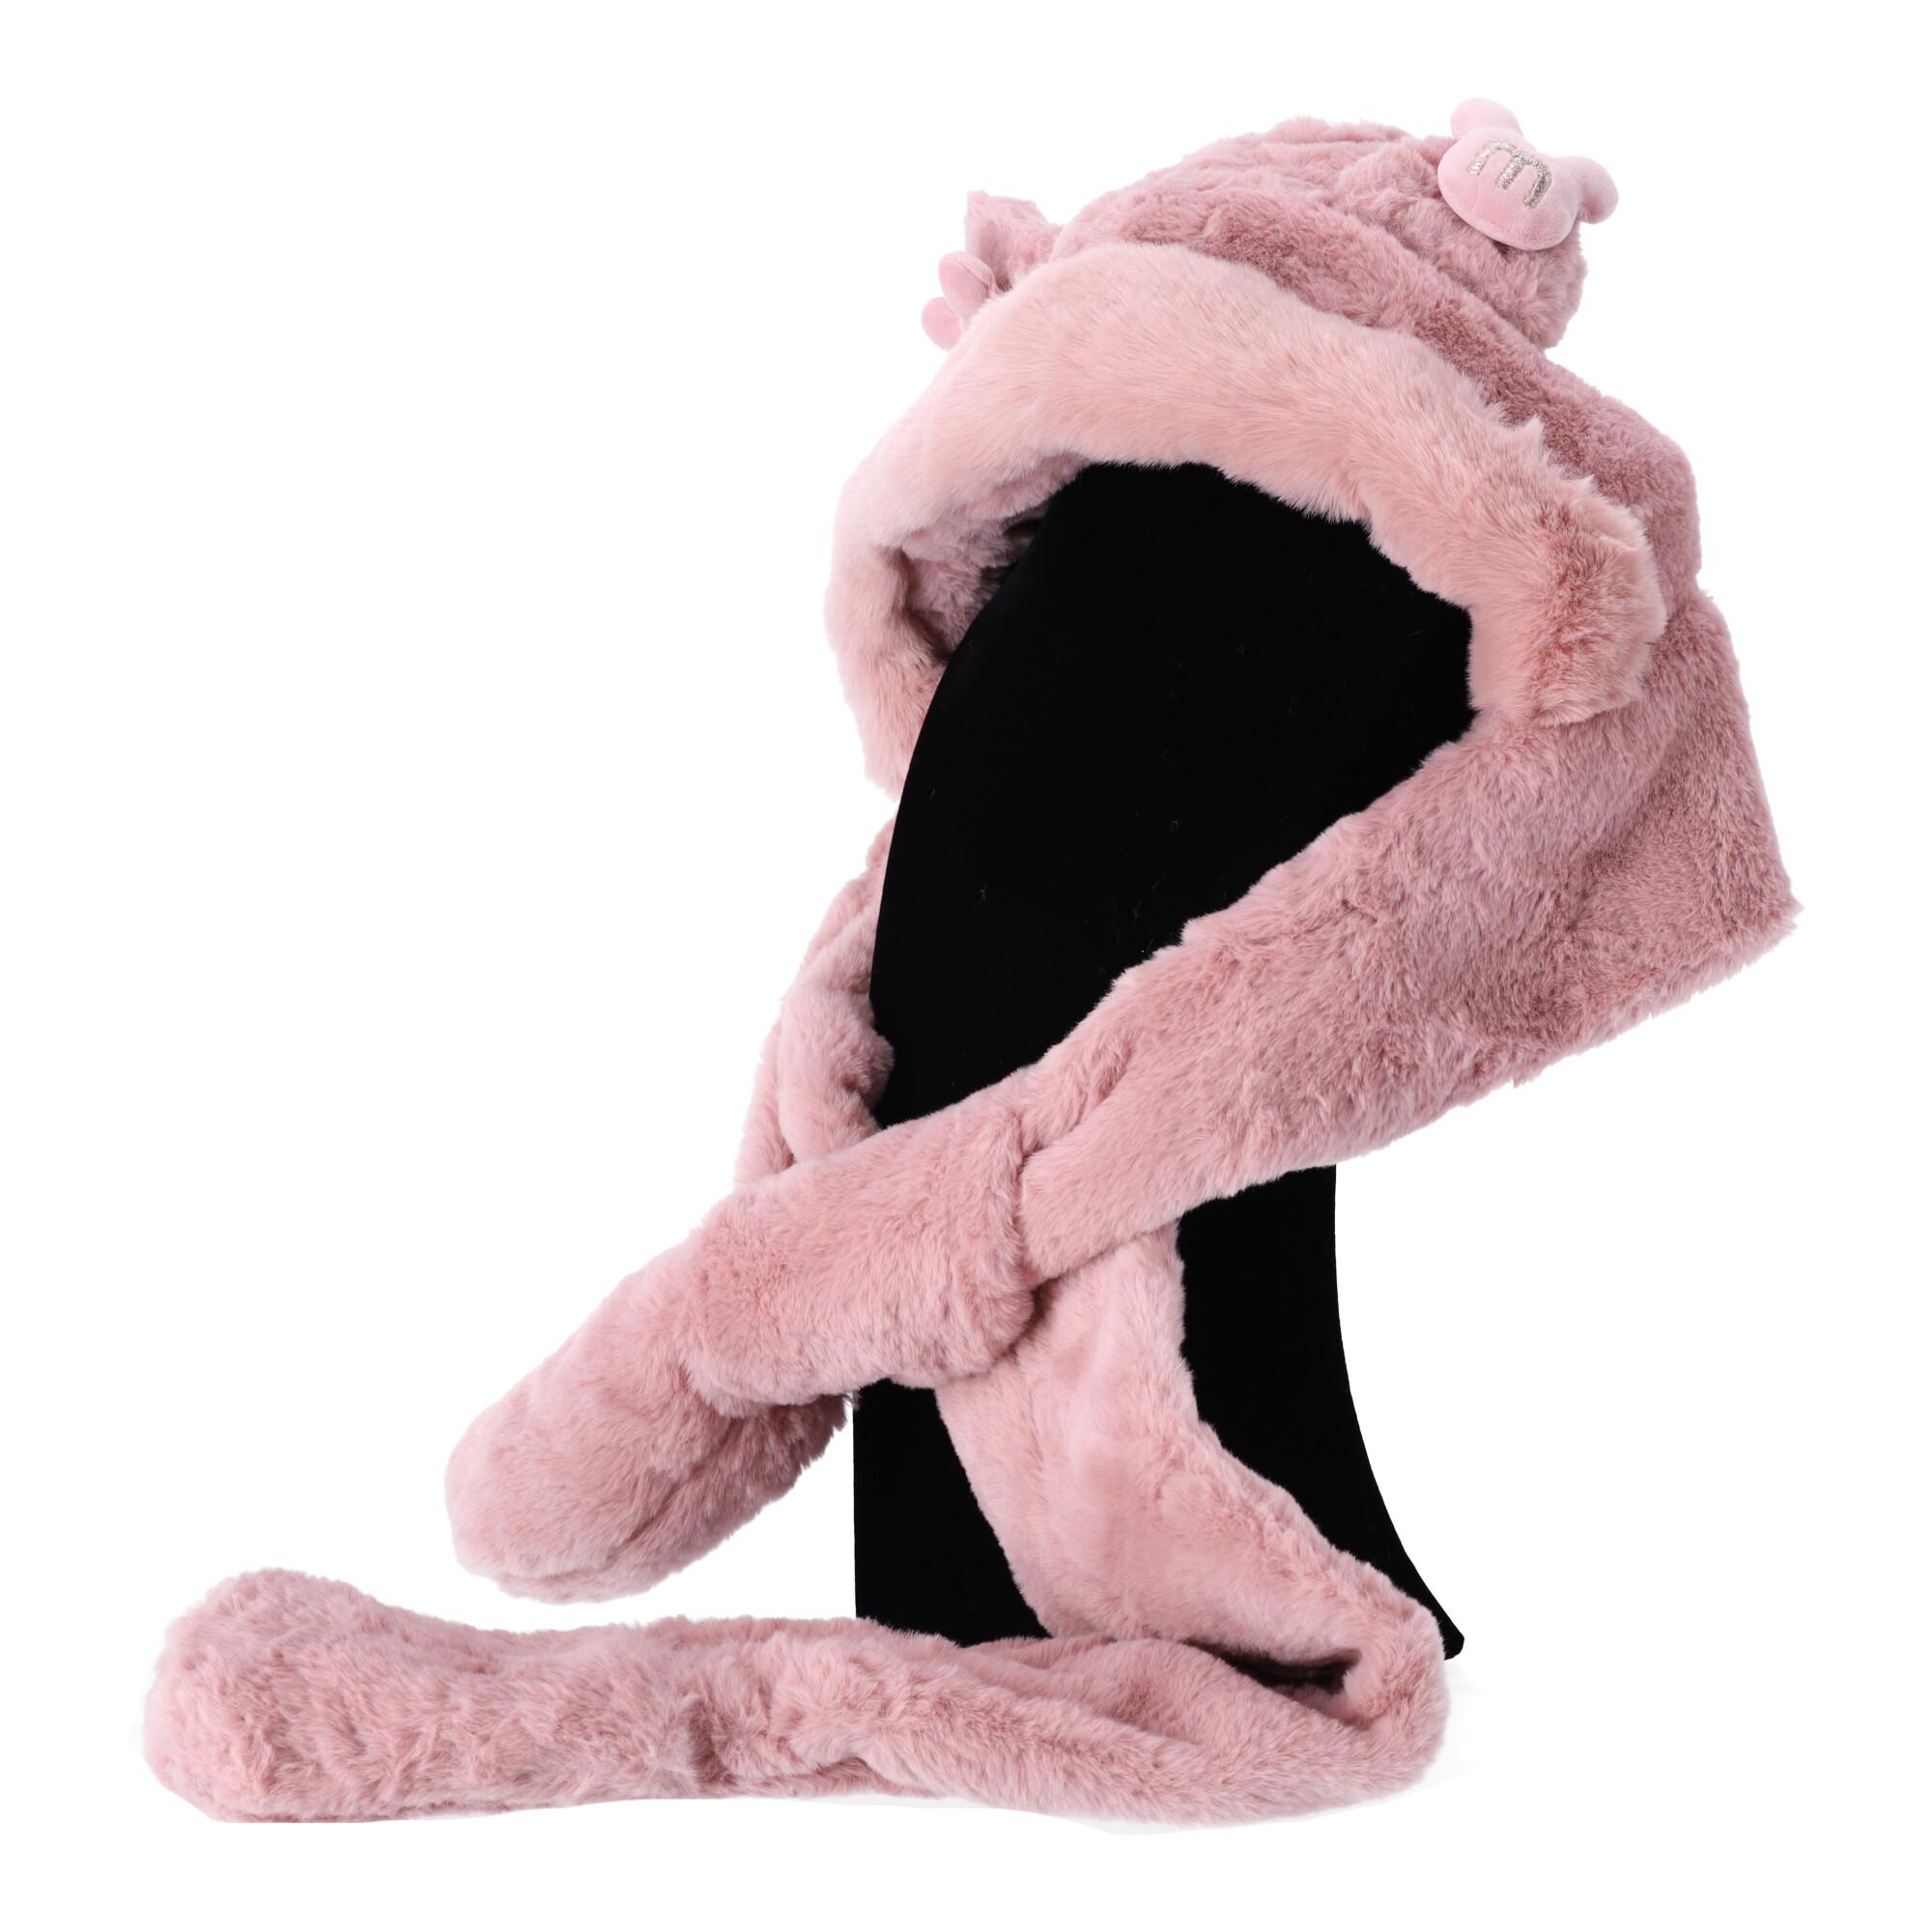 Children's plush hat with a scarf and 3in1 gloves for children from 2 to 12 years old - pink